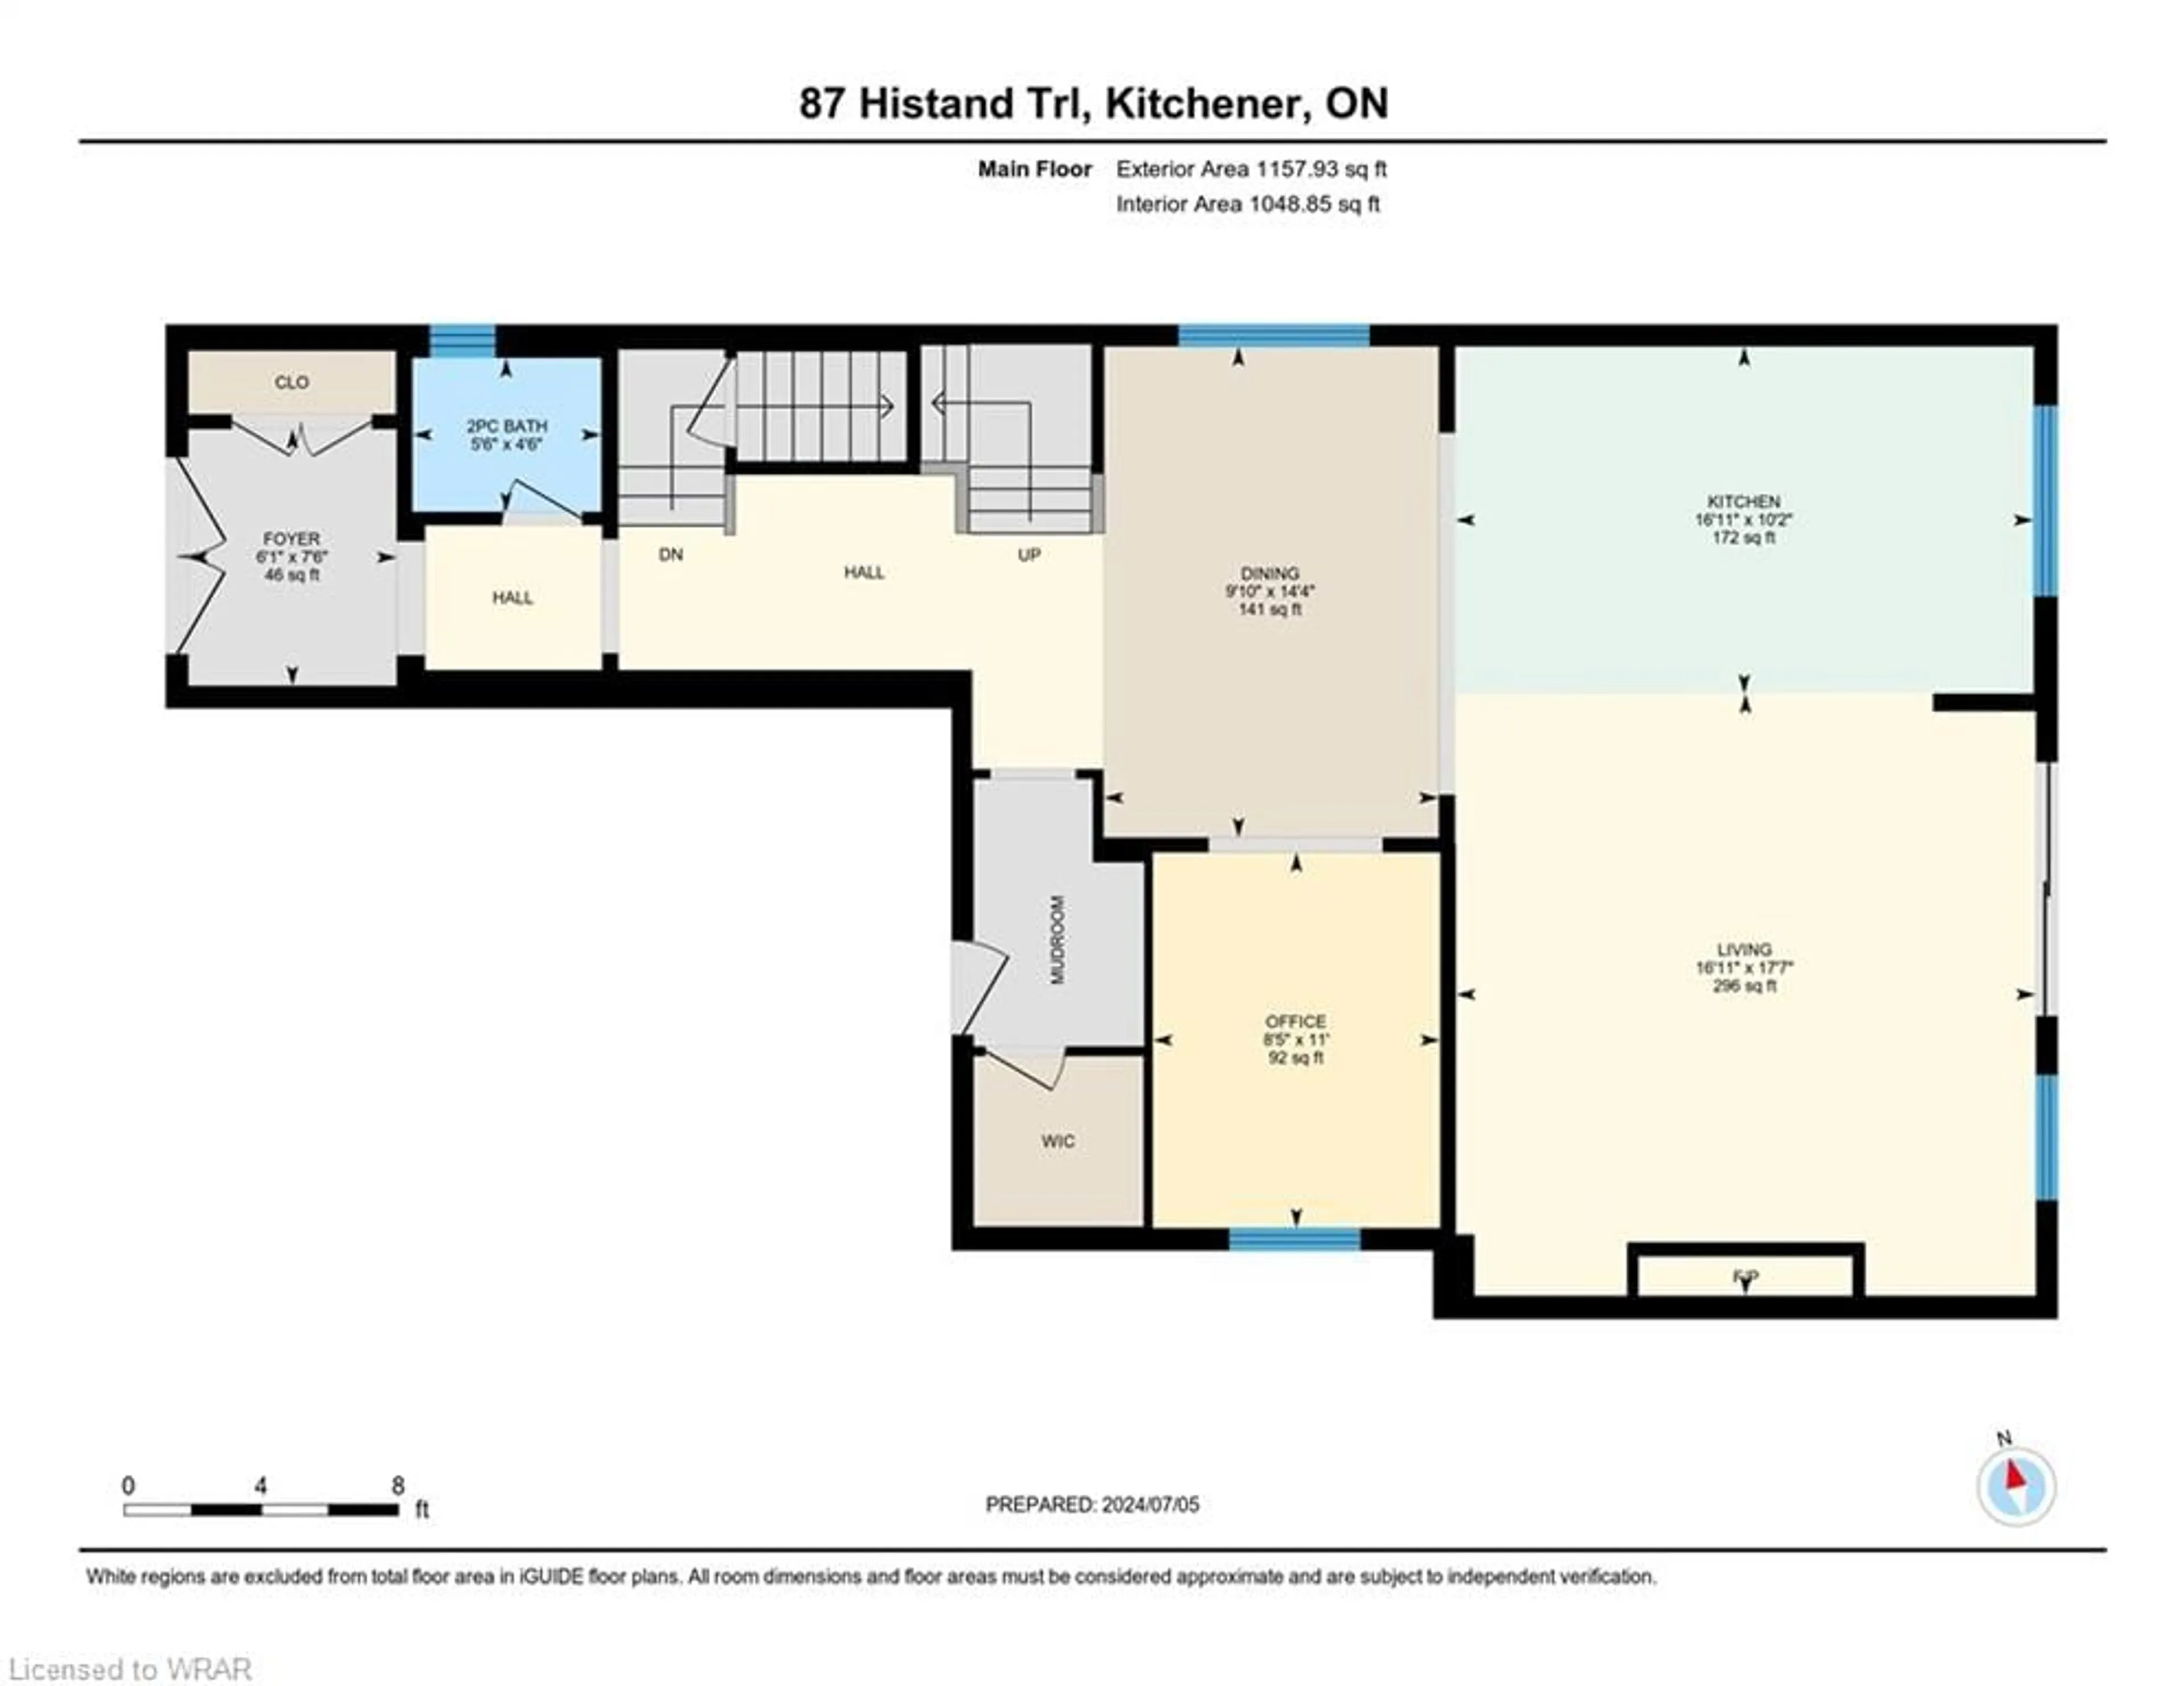 Floor plan for 87 Histand Trail, Kitchener Ontario N2R 0S2